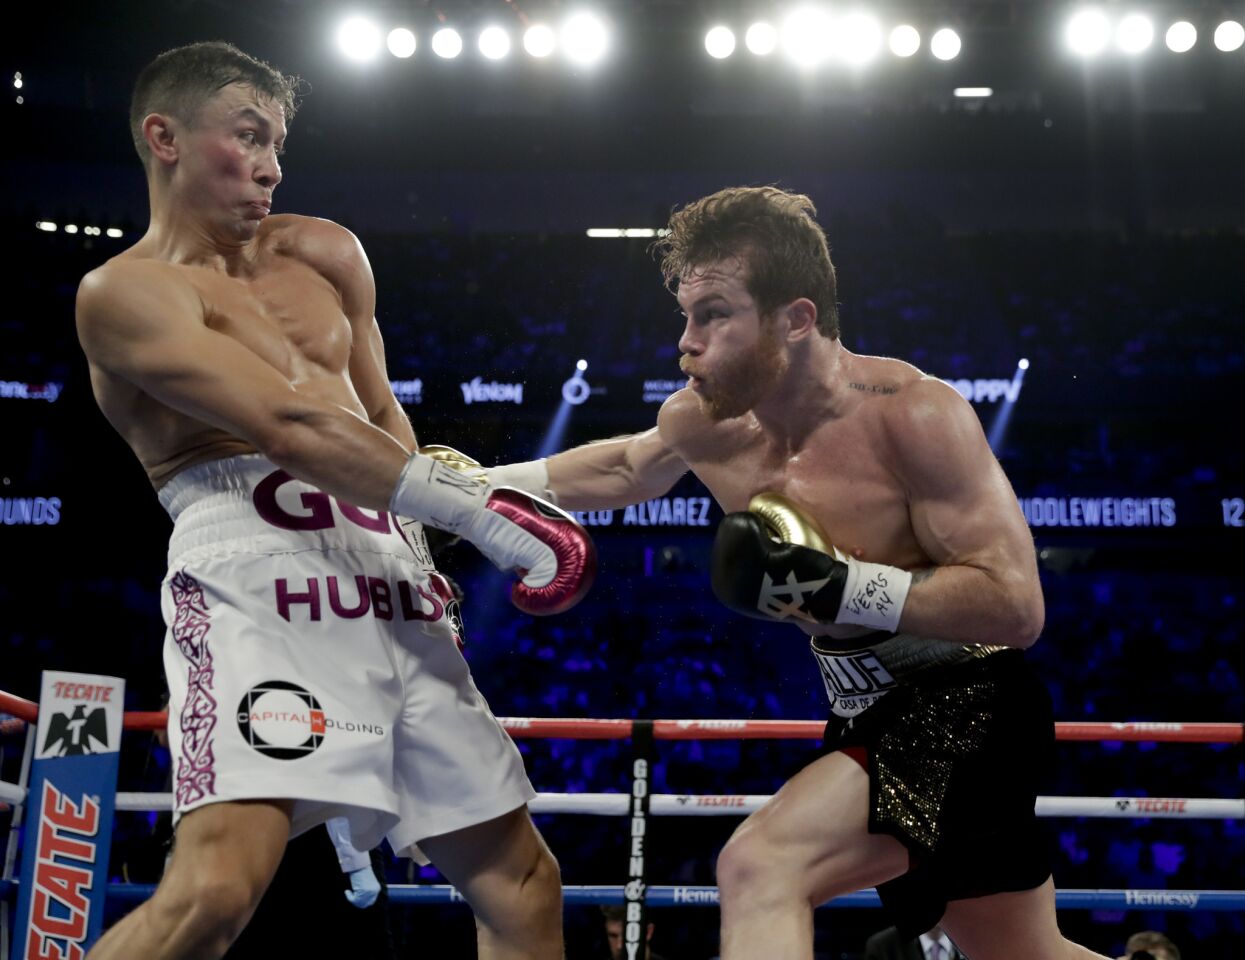 Gennady Golovkin, left, and Canelo Alvarez trade punches in the second round during a middleweight title boxing match, Saturday, Sept. 15, 2018, in Las Vegas.